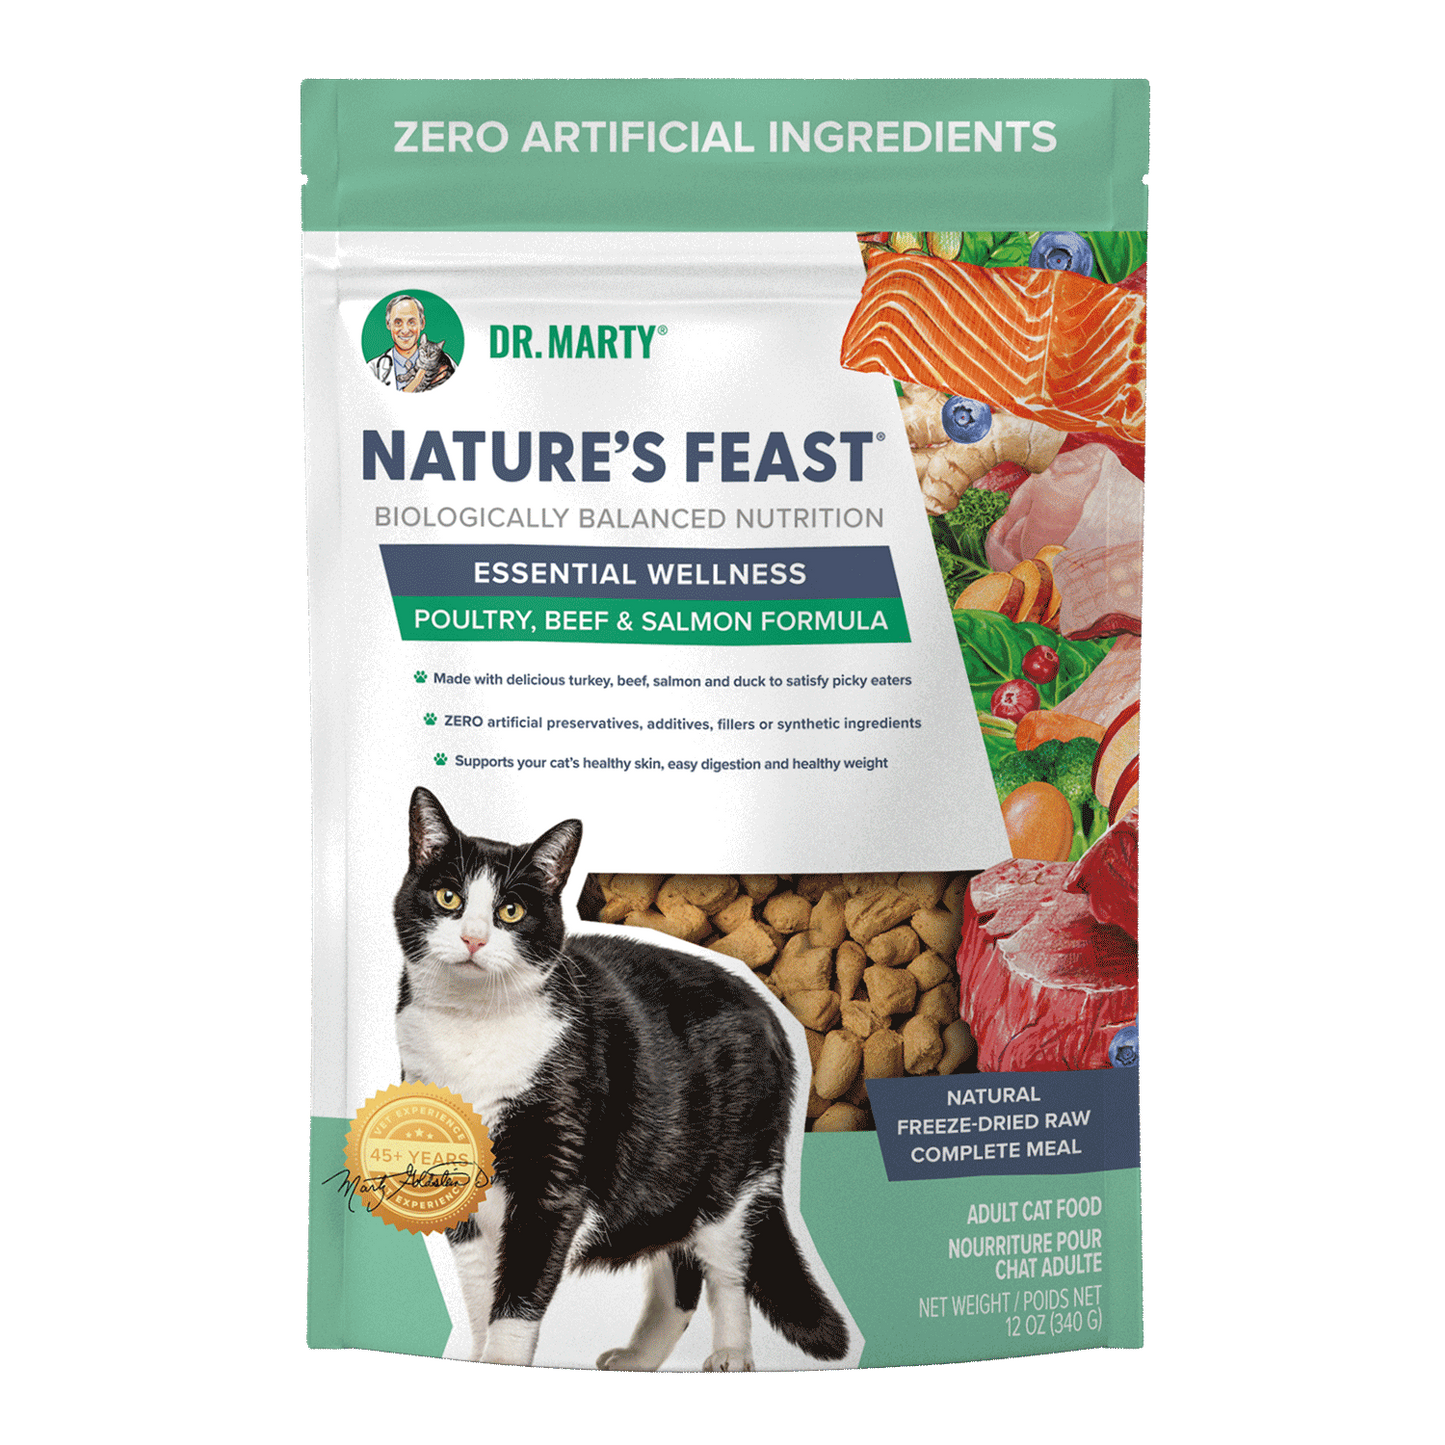 DR MARTY NATURE'S FEAST POULTRY, BEEF & SALMON CAT FOOD